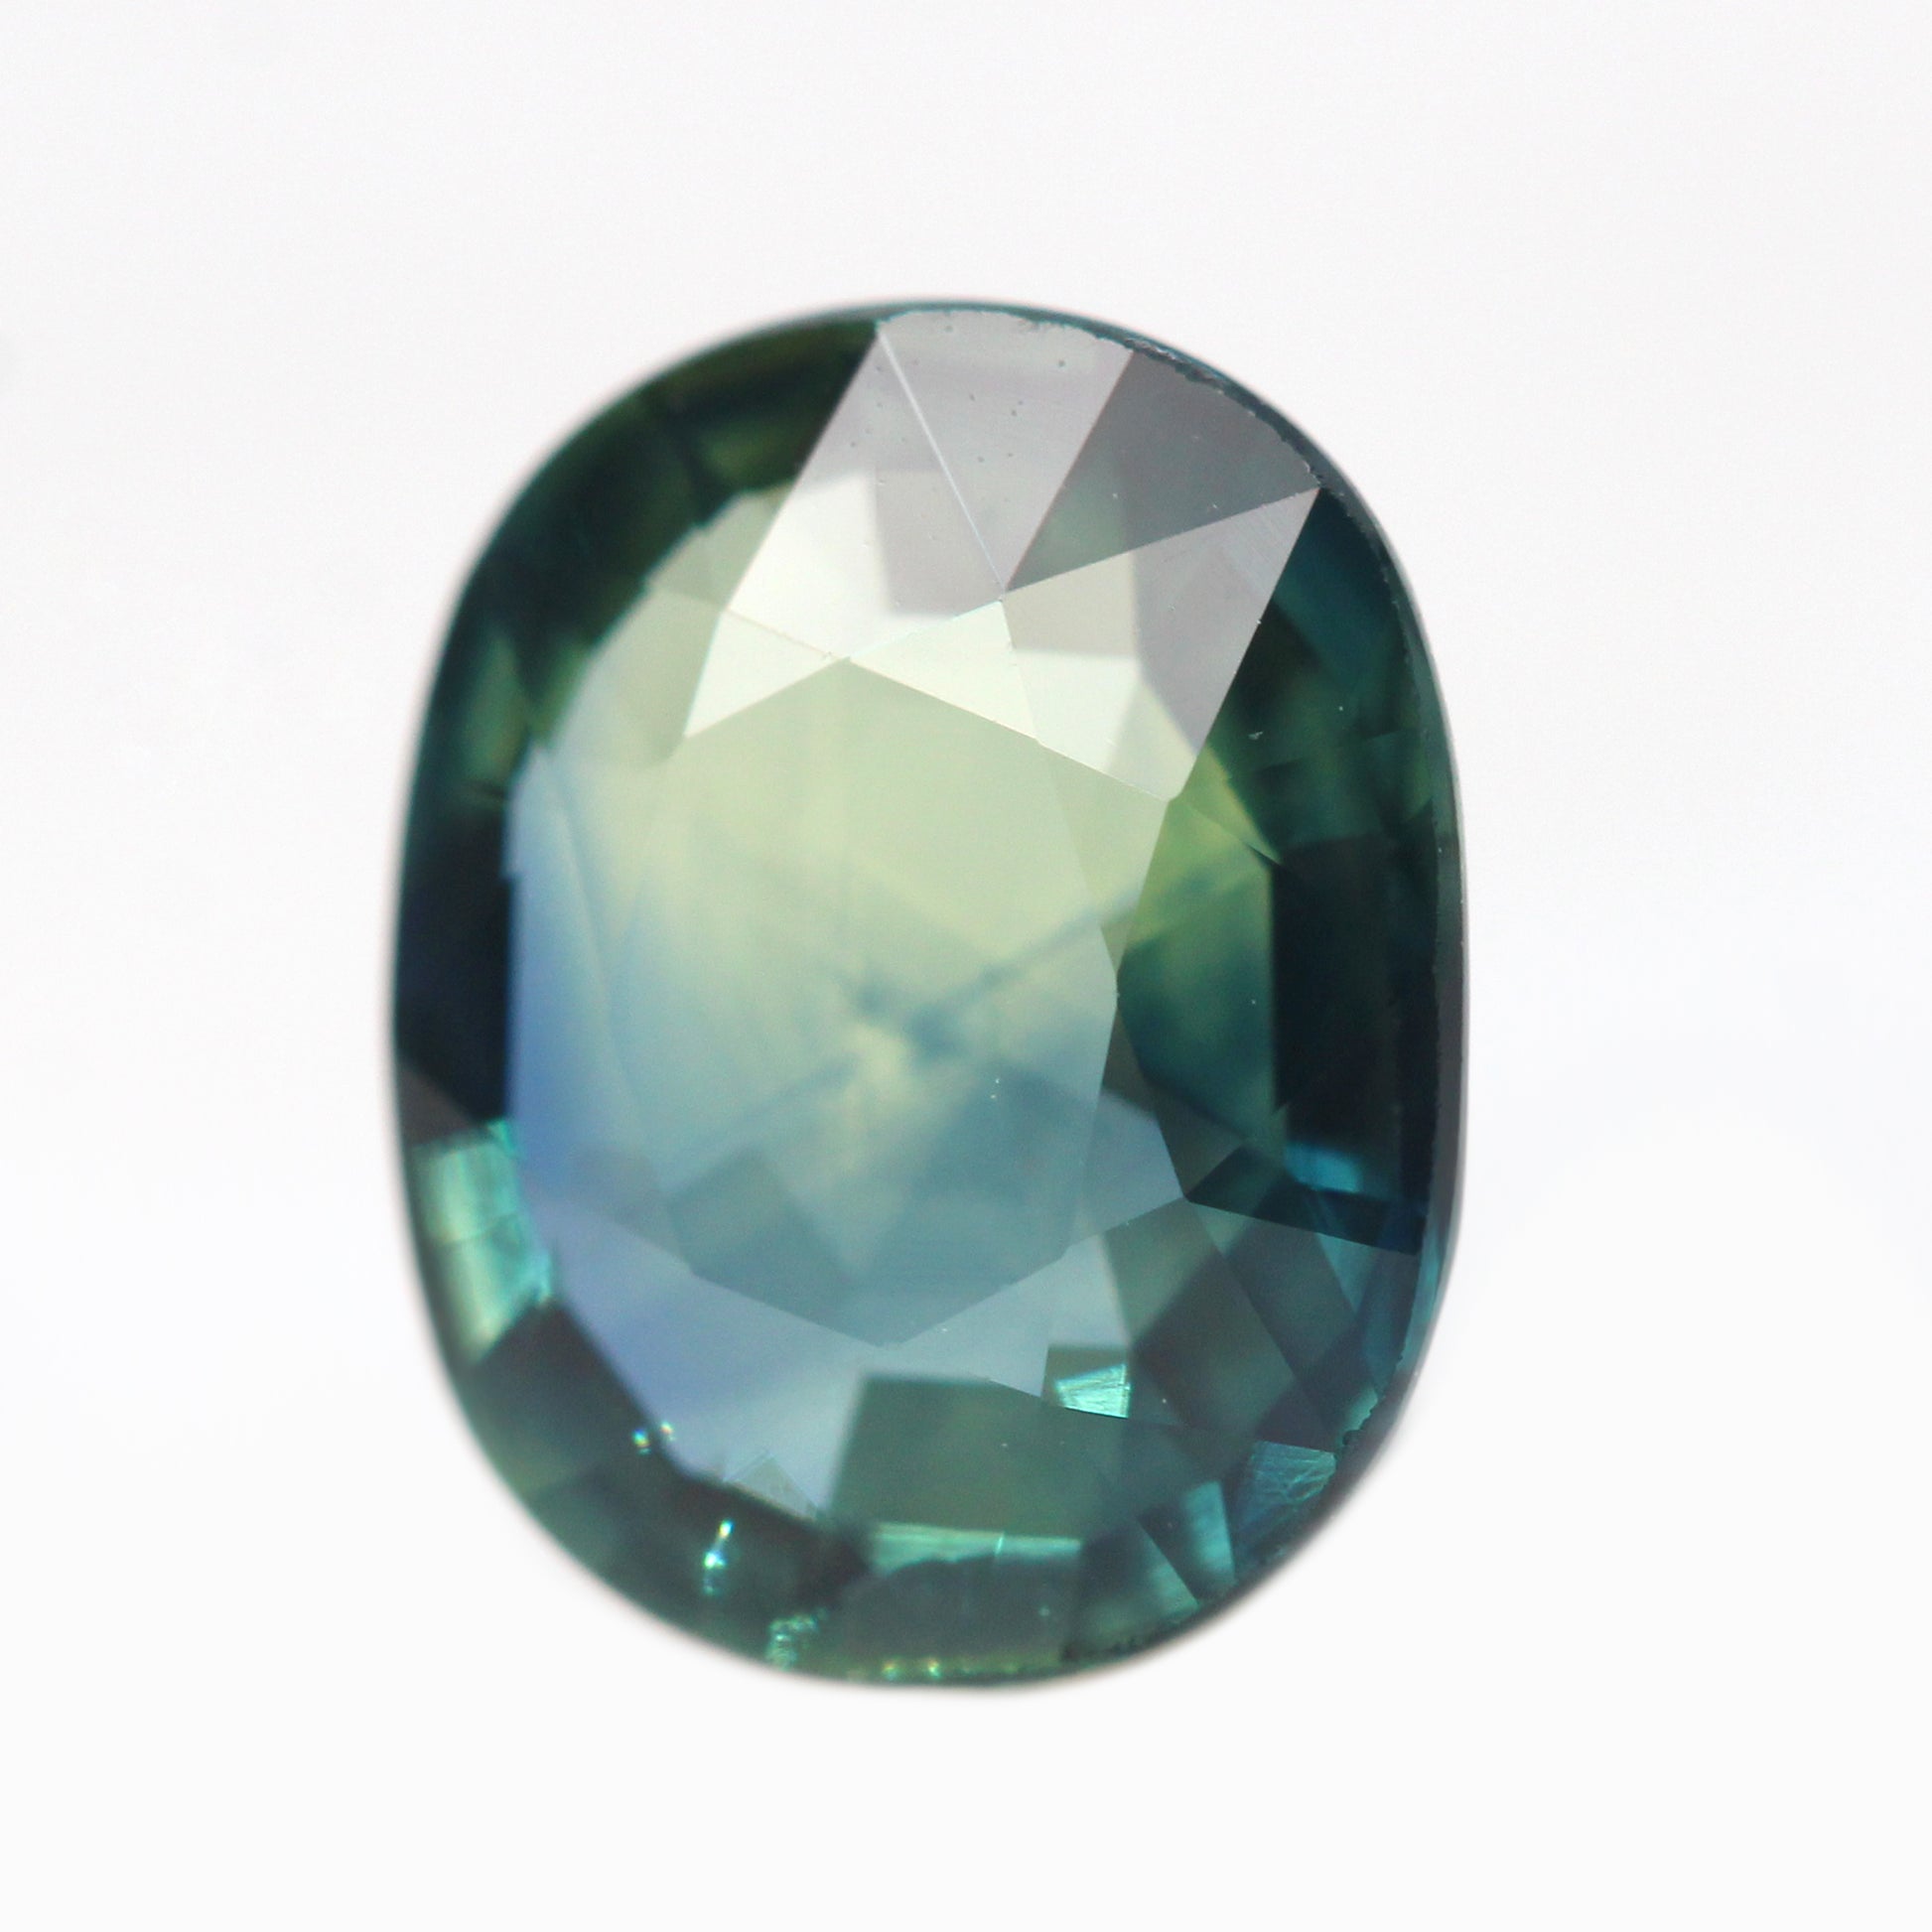 1.64 Carat Rounded Oval Clear Teal Australian Sapphire for Custom Work - Inventory Code TOS164 - Midwinter Co. Alternative Bridal Rings and Modern Fine Jewelry